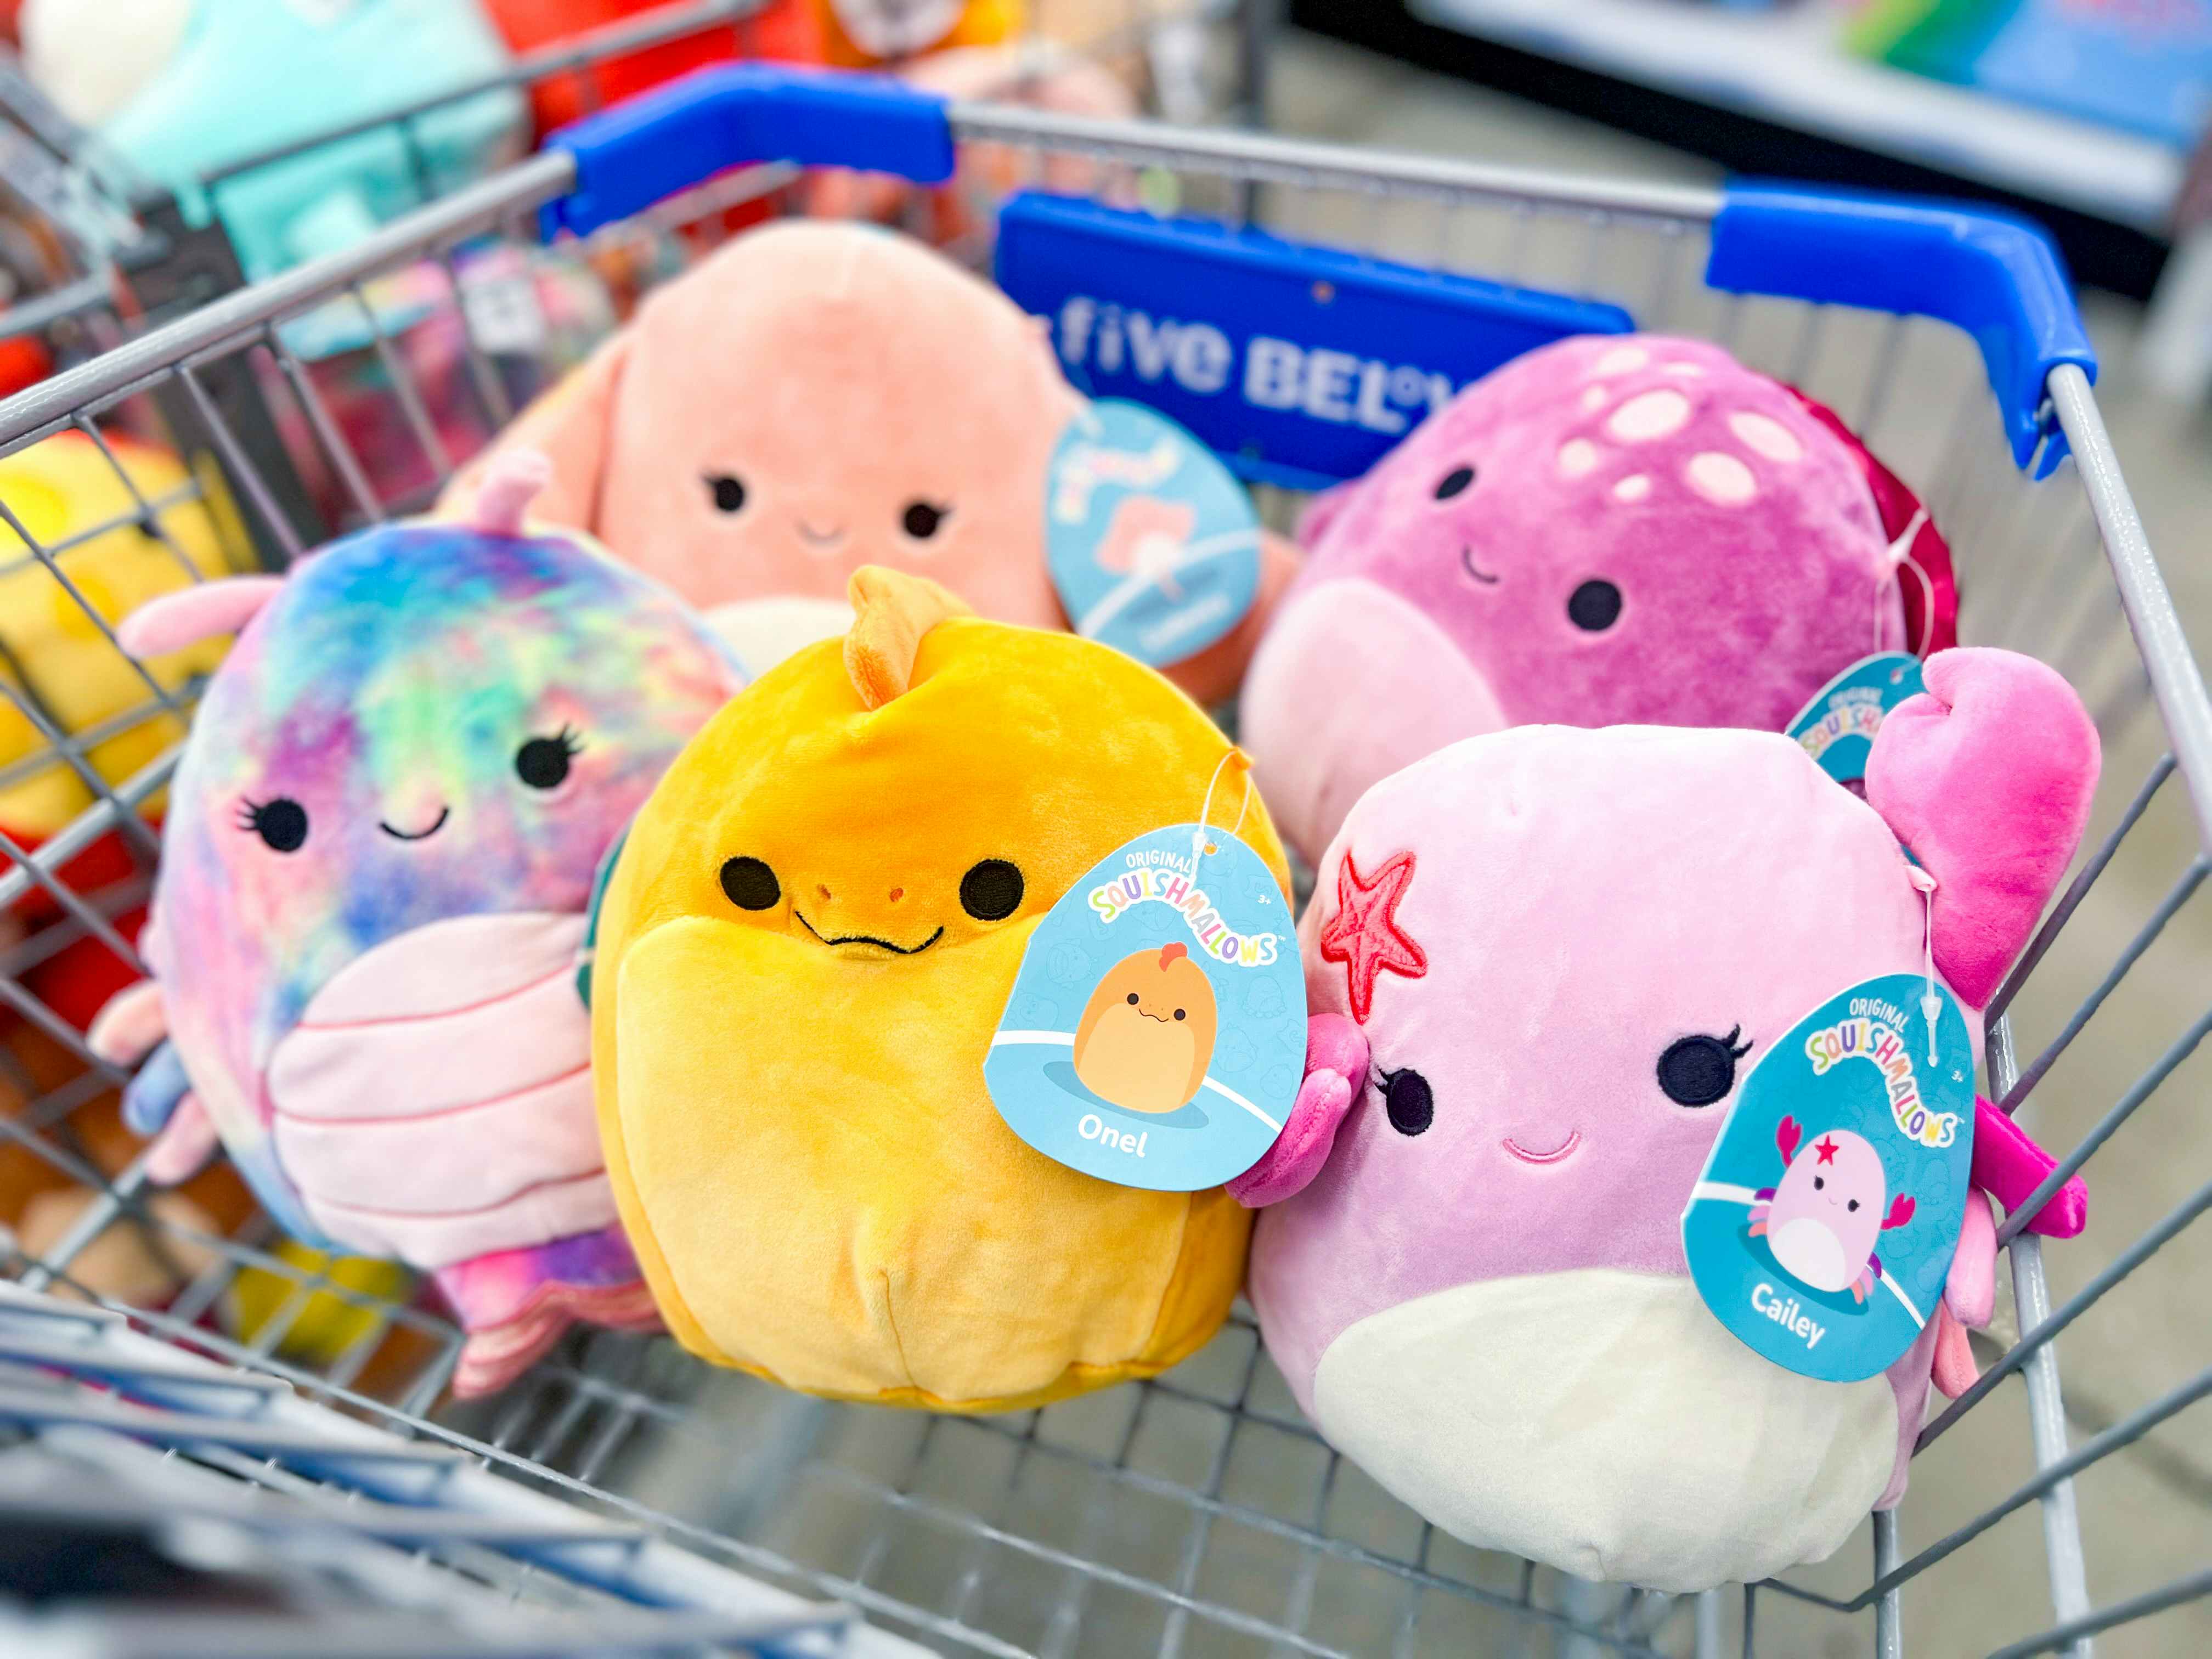 Squishmallows - Raise Your Hand If You Want New Squishmallows! Check out  the latest additions to our #squishmallowsquad in the Squishmallow Shop!